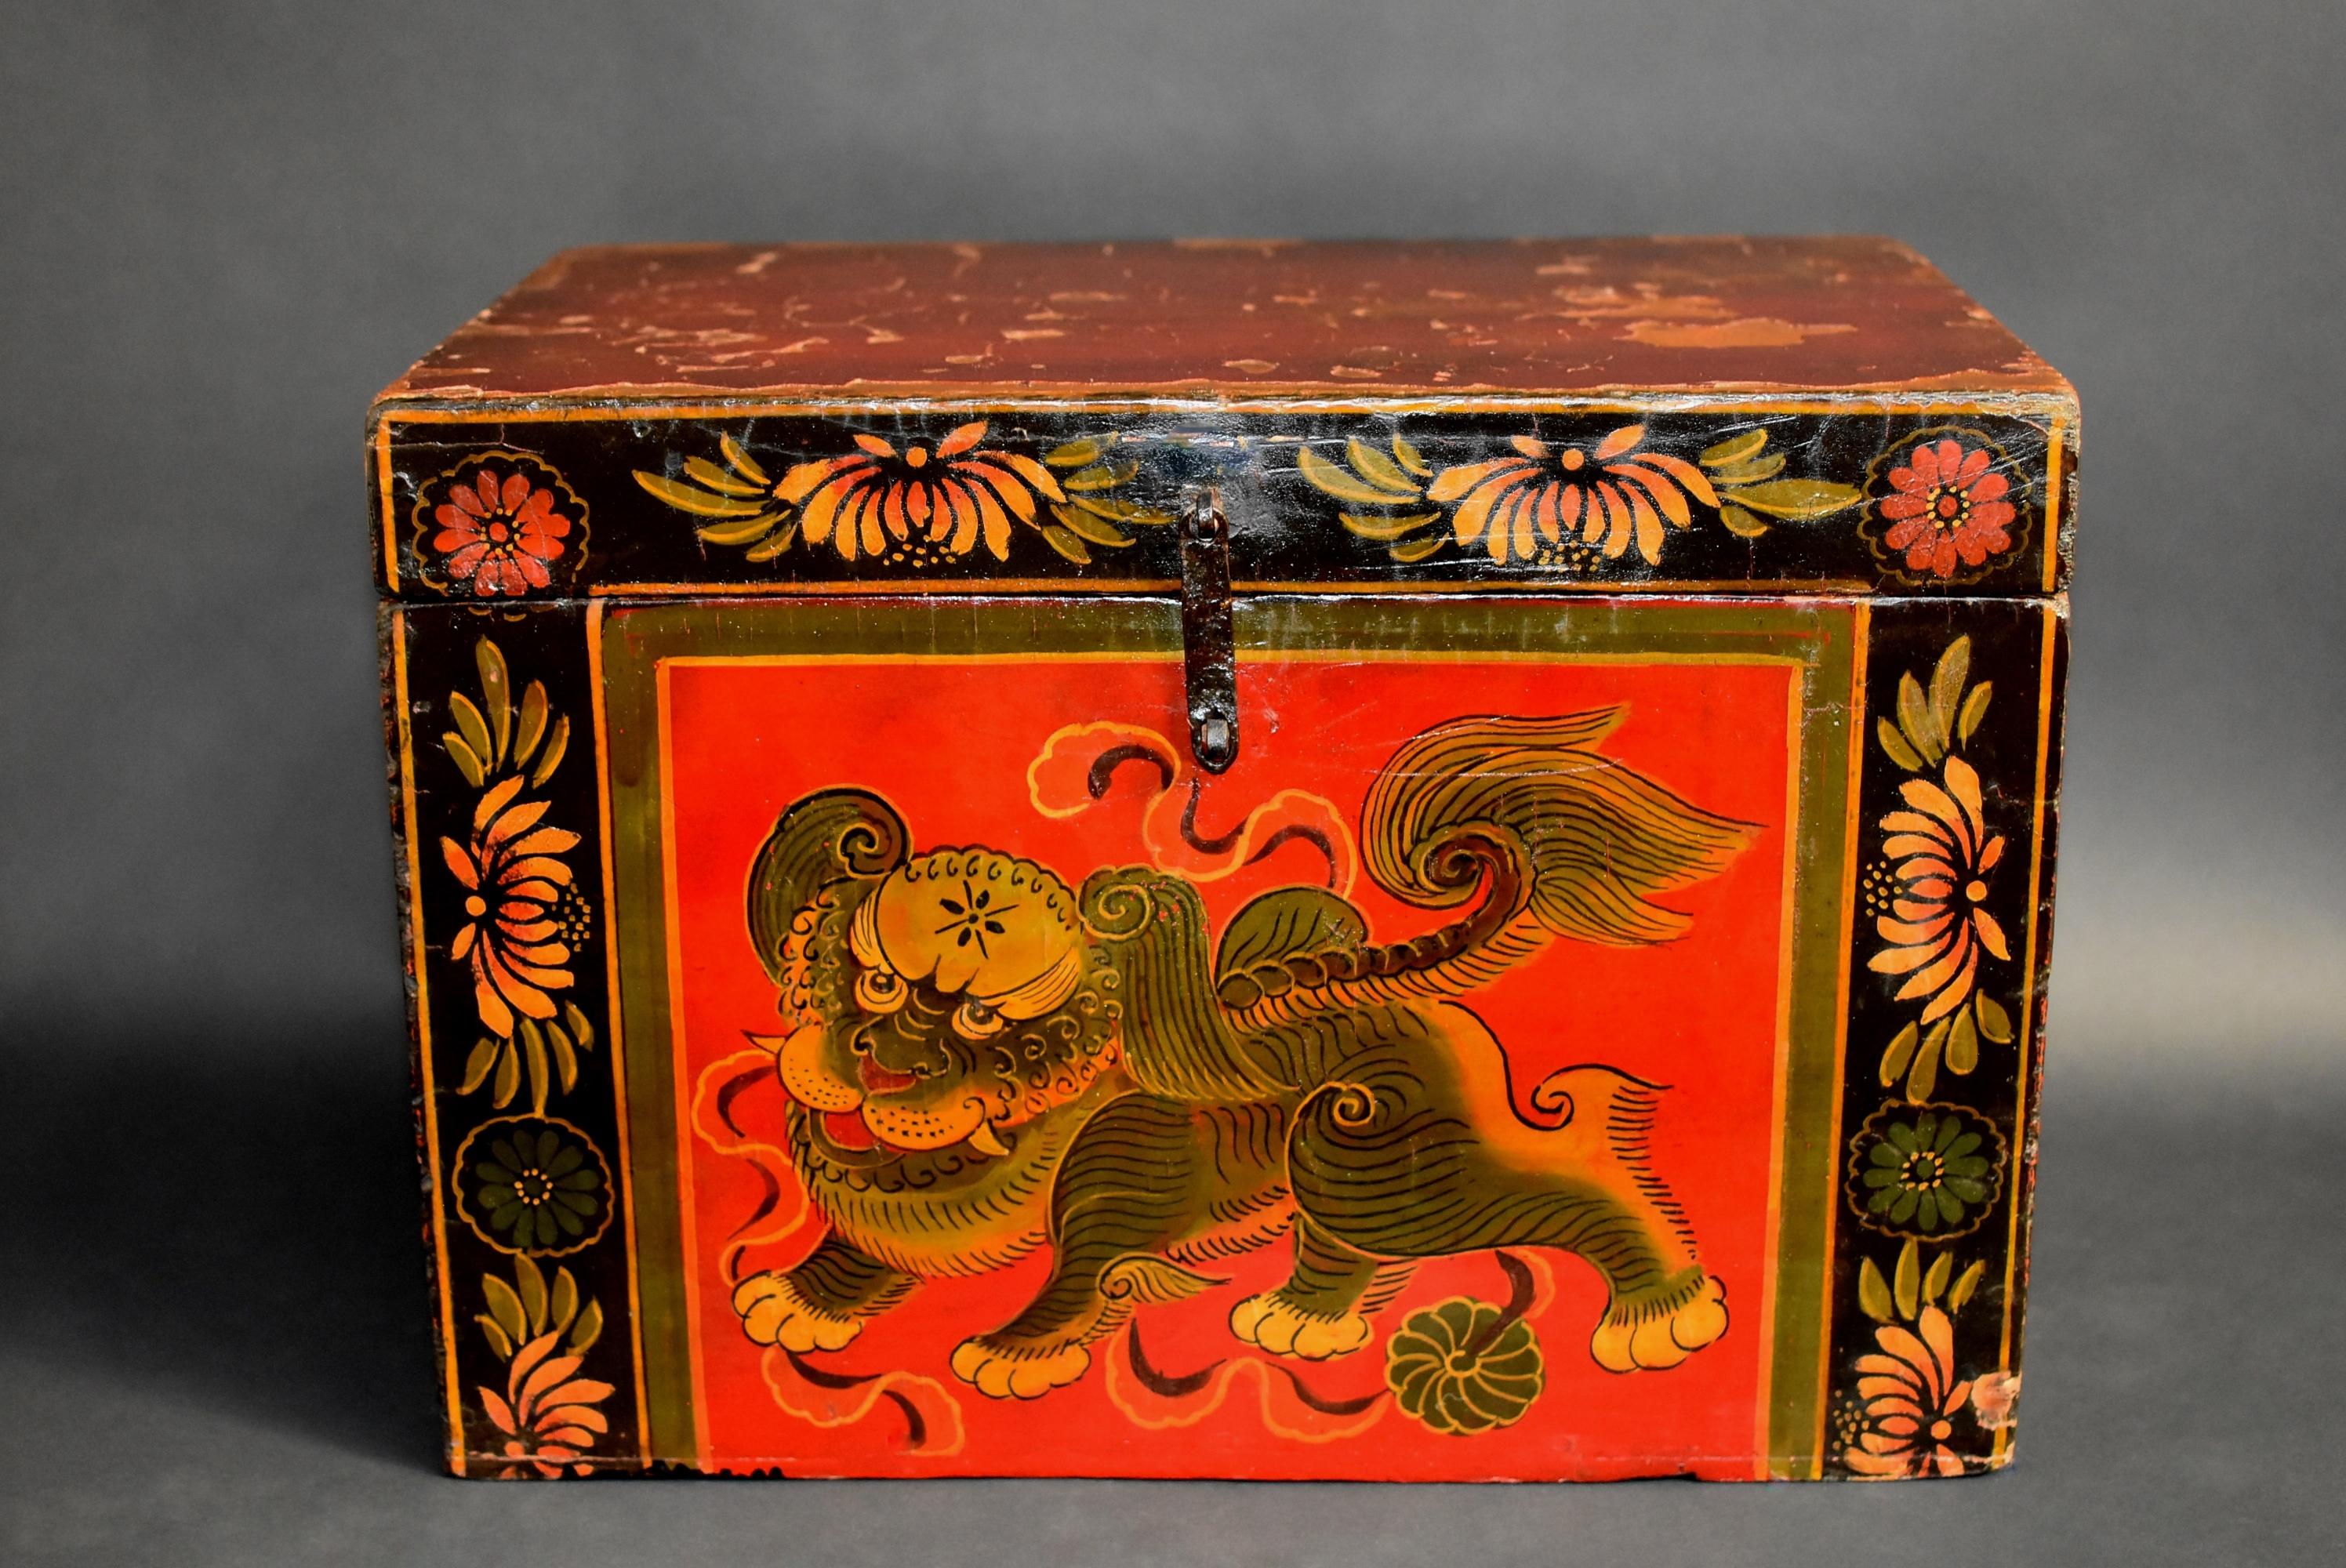 A hand painted Tibetan box featuring a foo dog with masculine body and furry tail. Two of his paws press down on a ribbon that strings a brocade ball. A border of multi-petal chrysanthemums decorate the outer boundaries. Solid wood construction.